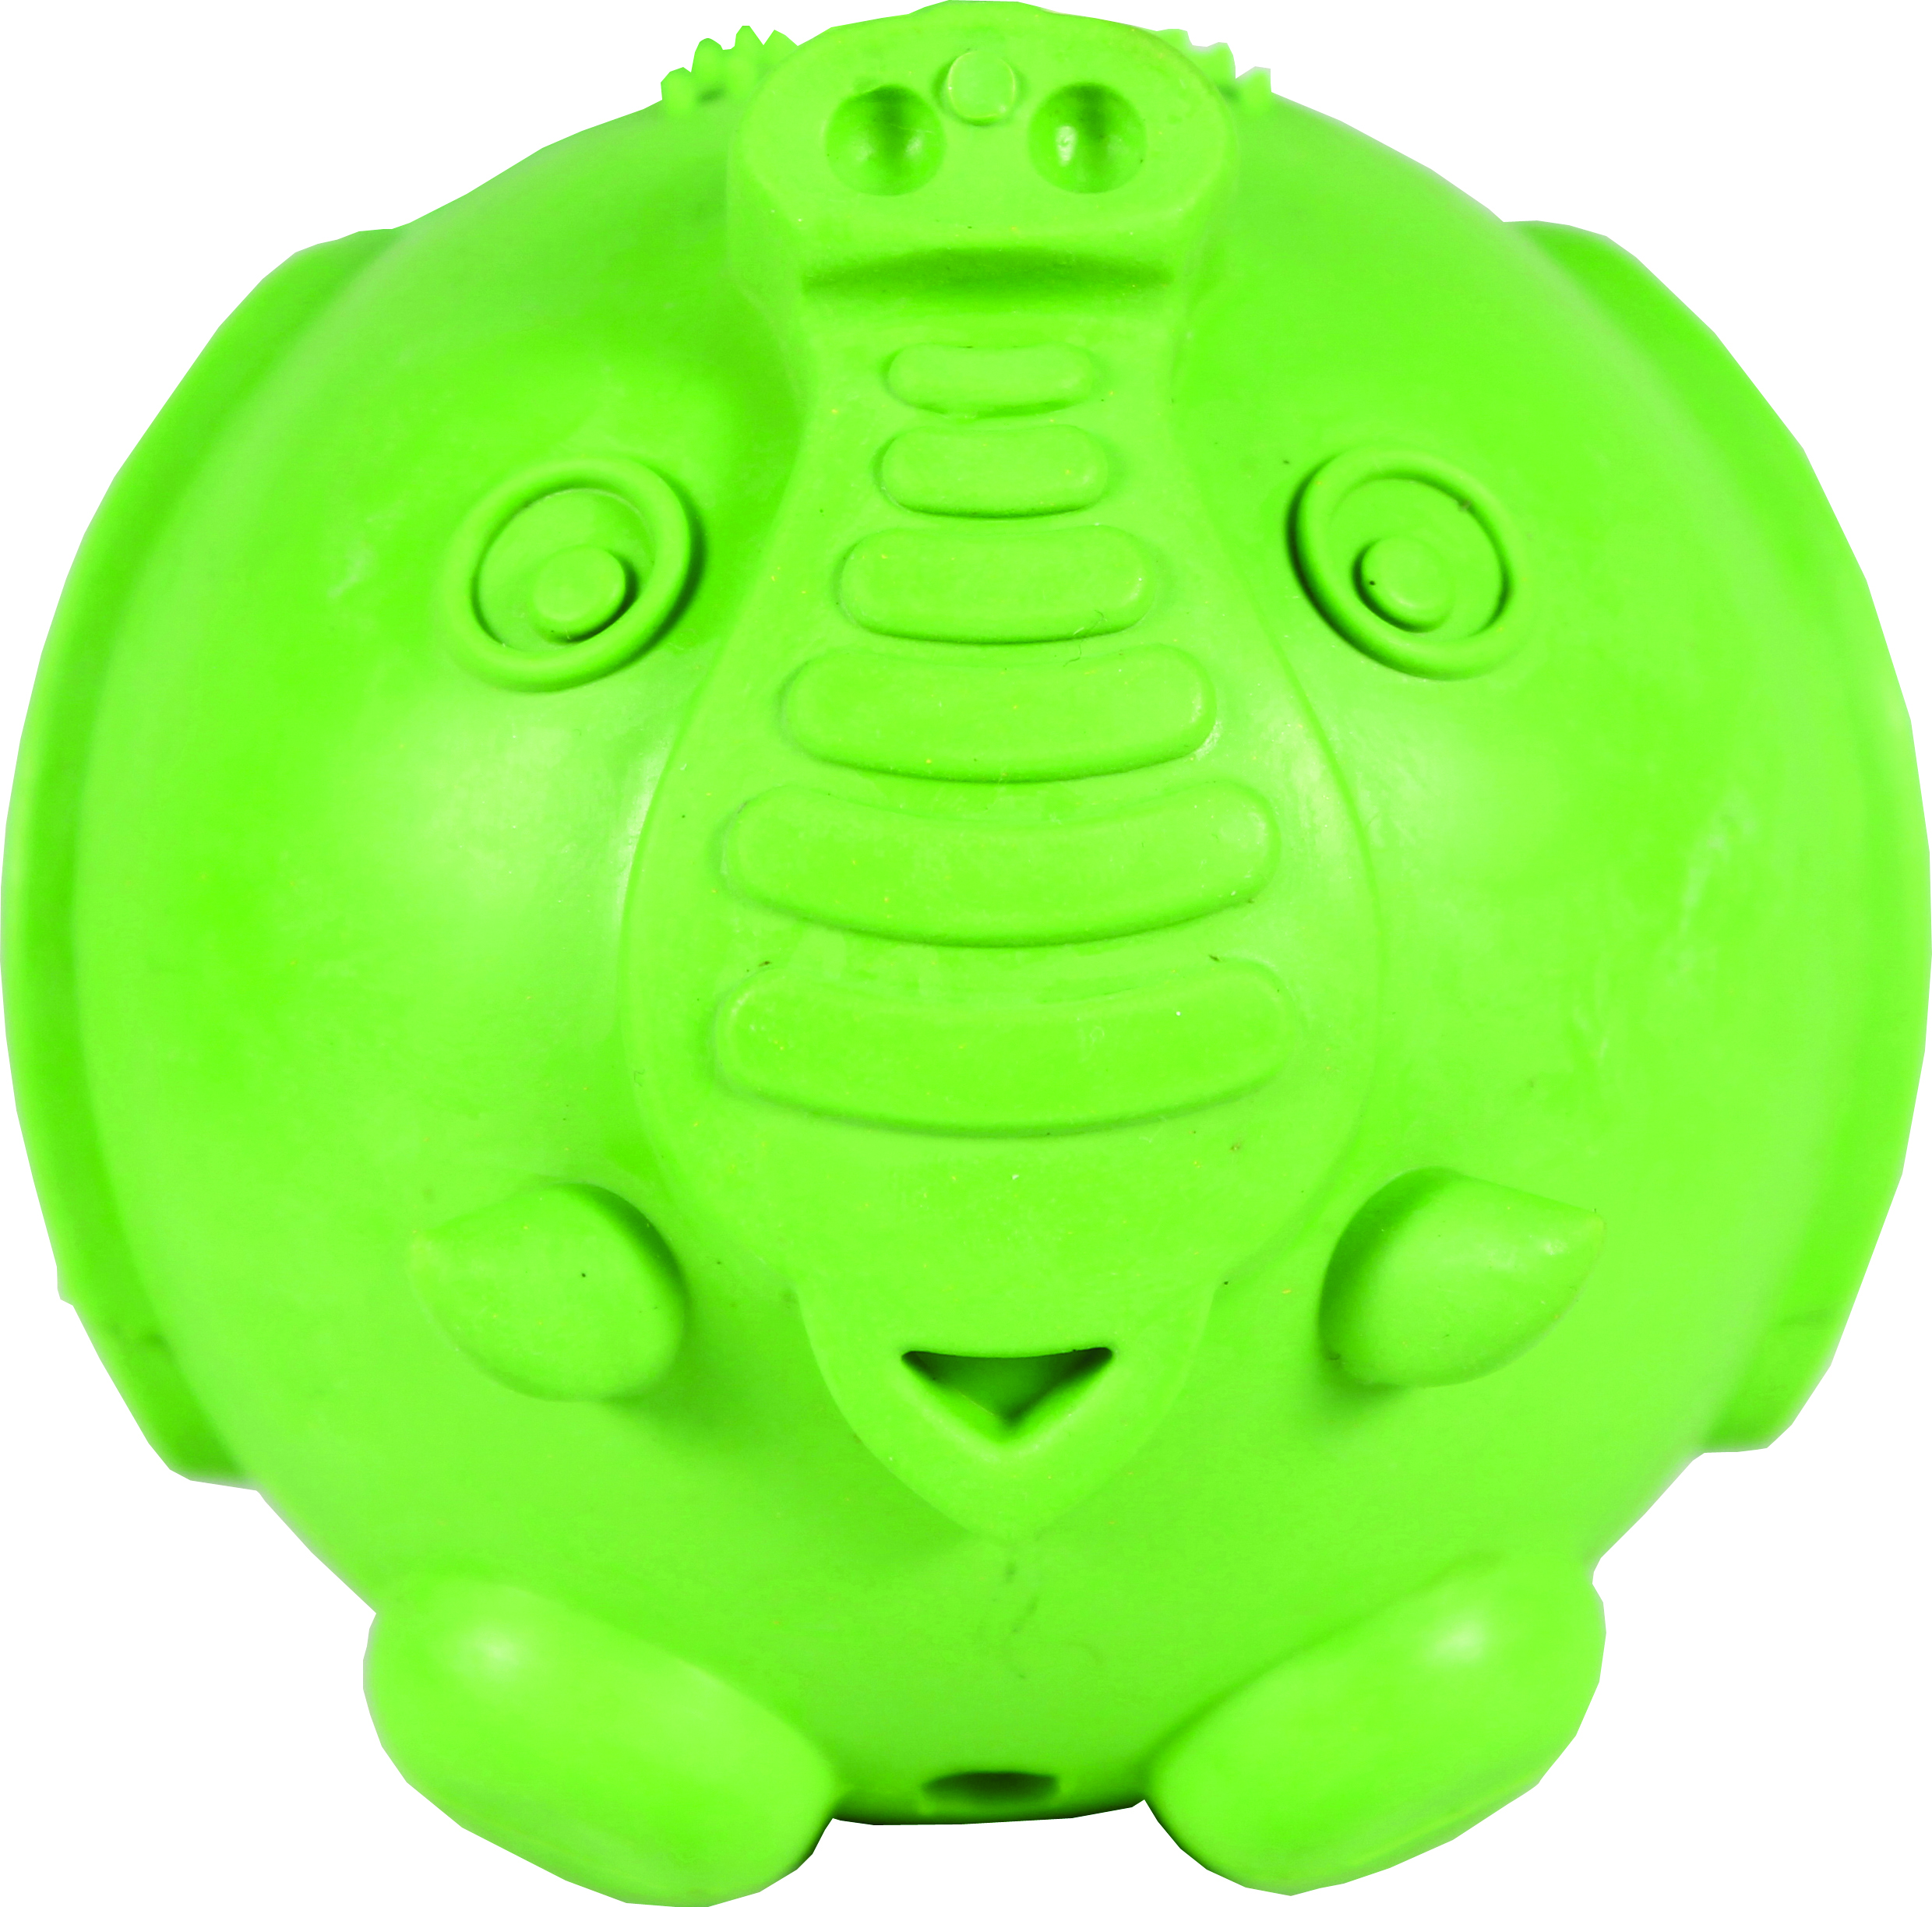 BUSY BUDDY ELEPHUNK TREAT DISPENSER FOR DOGS